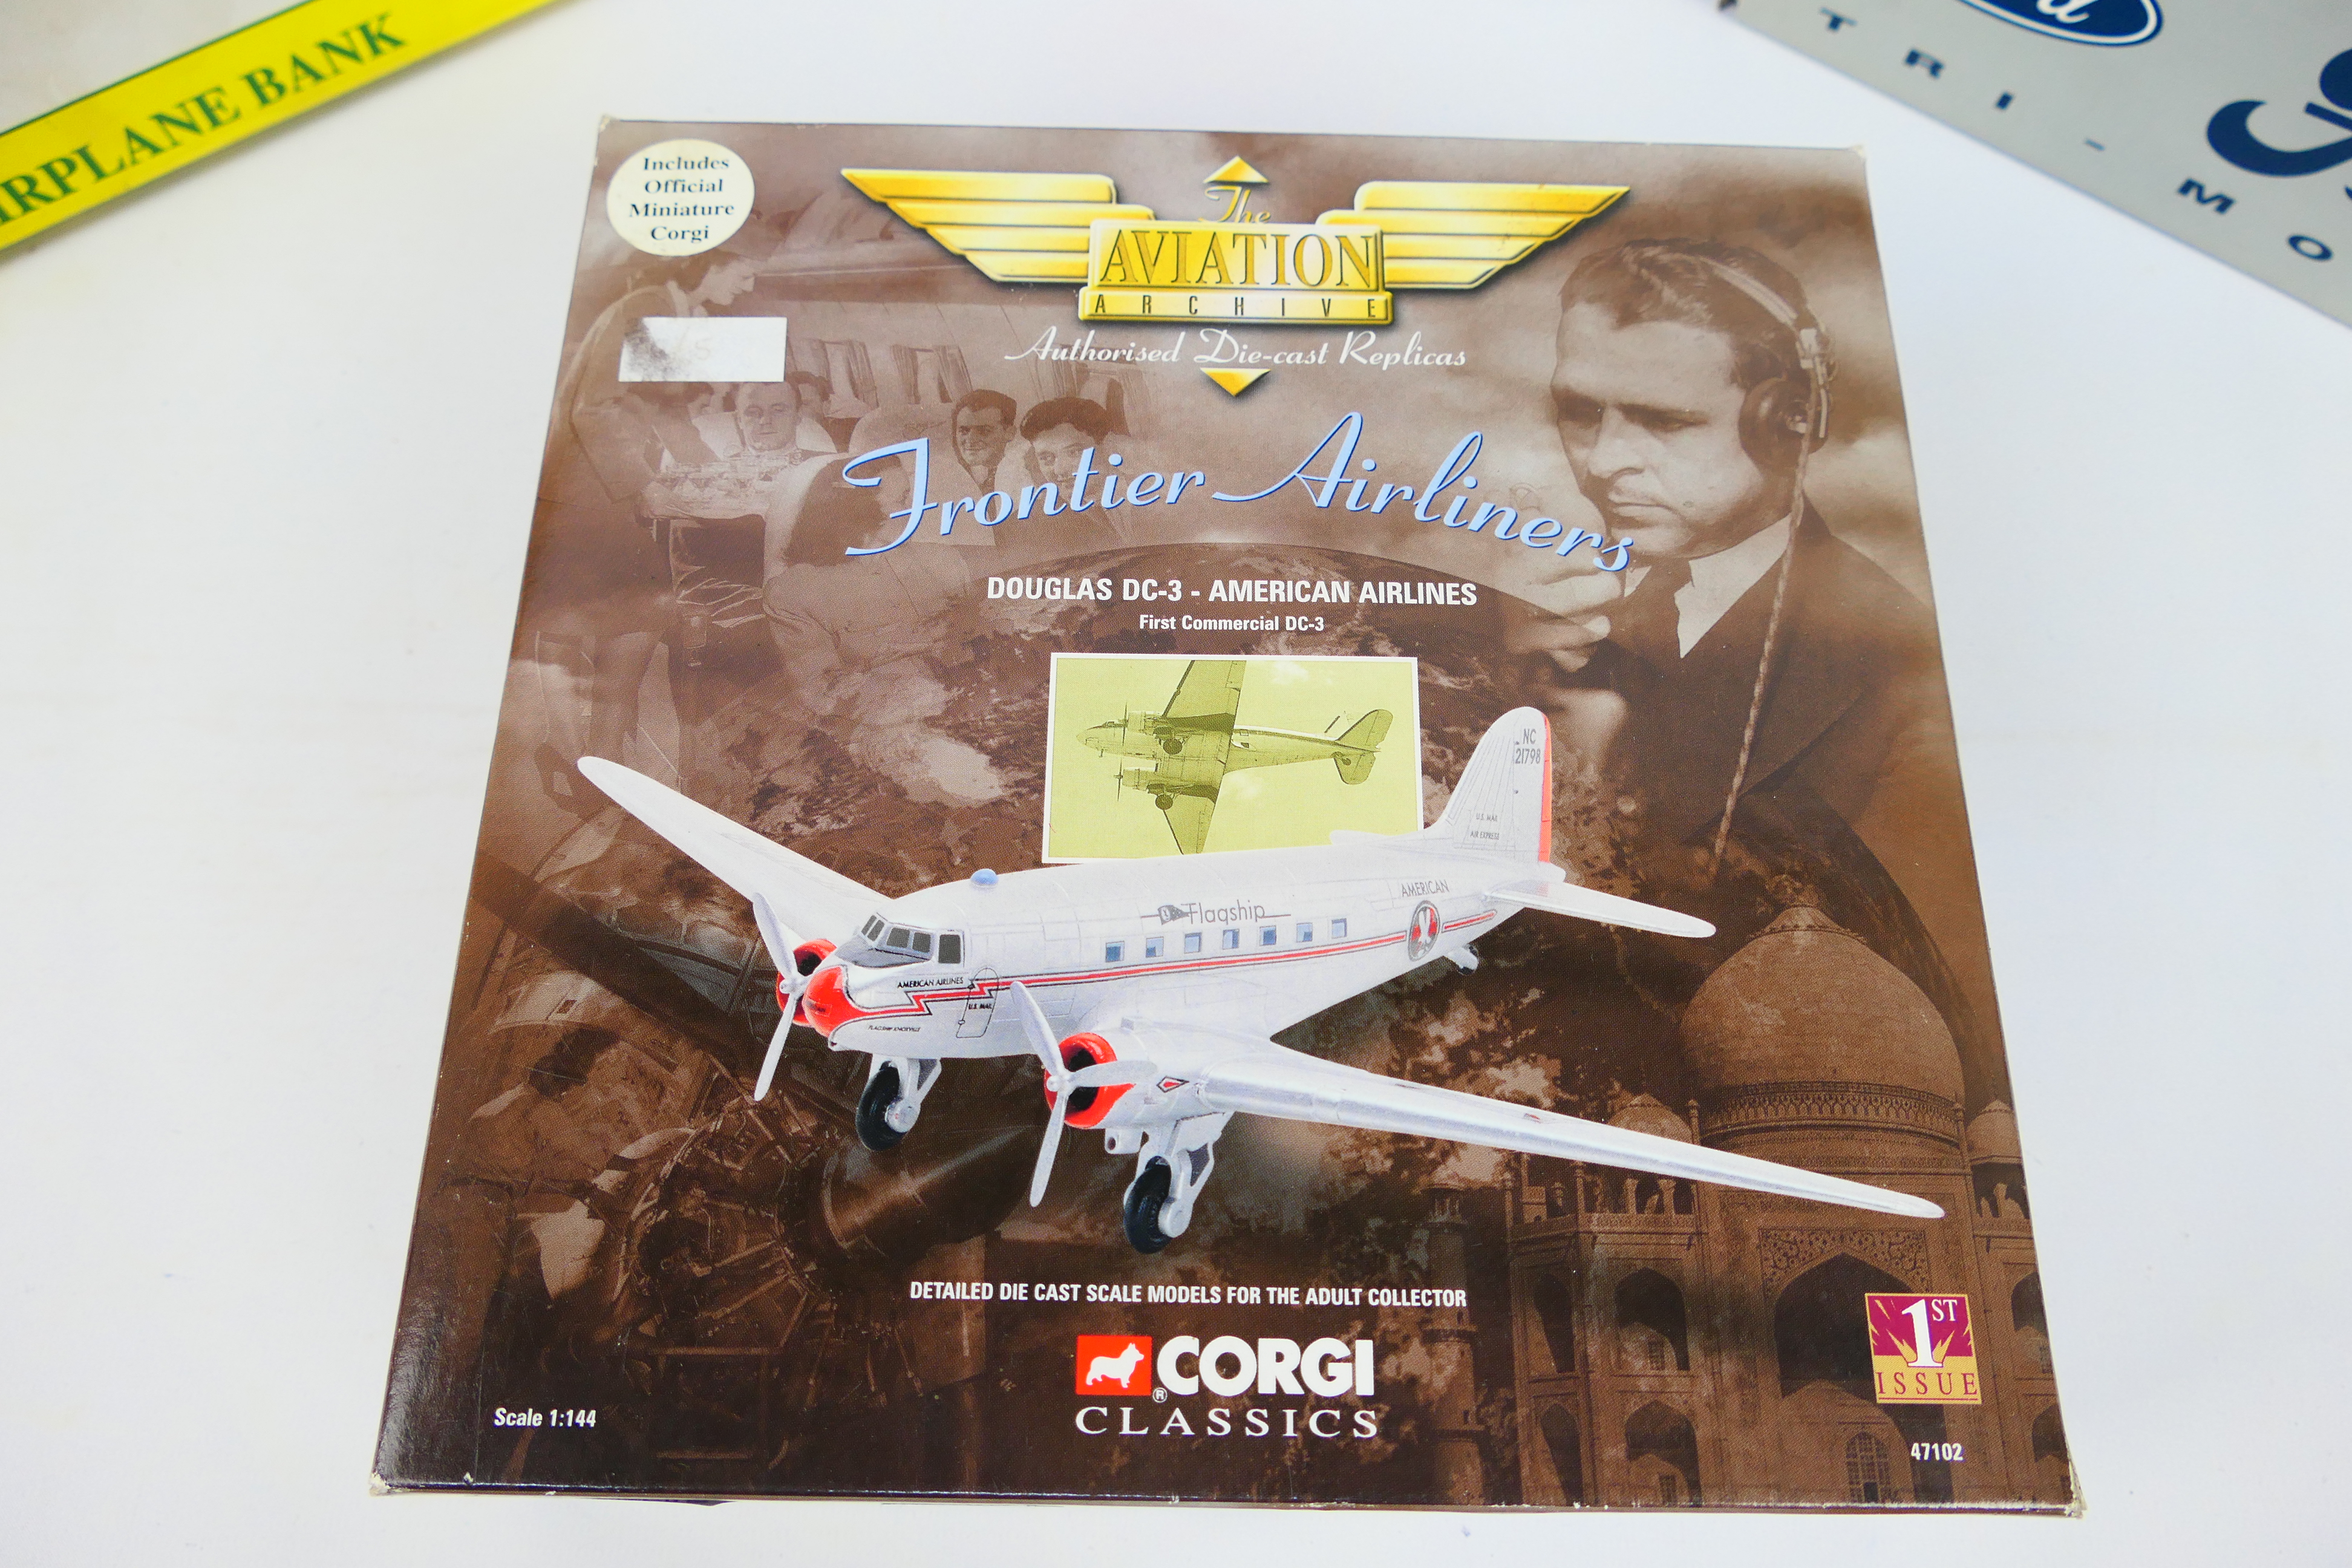 Corgi Aviation Archive - Ertl Collectibles - A boxed diecast model aircraft and three diecast model - Image 4 of 6